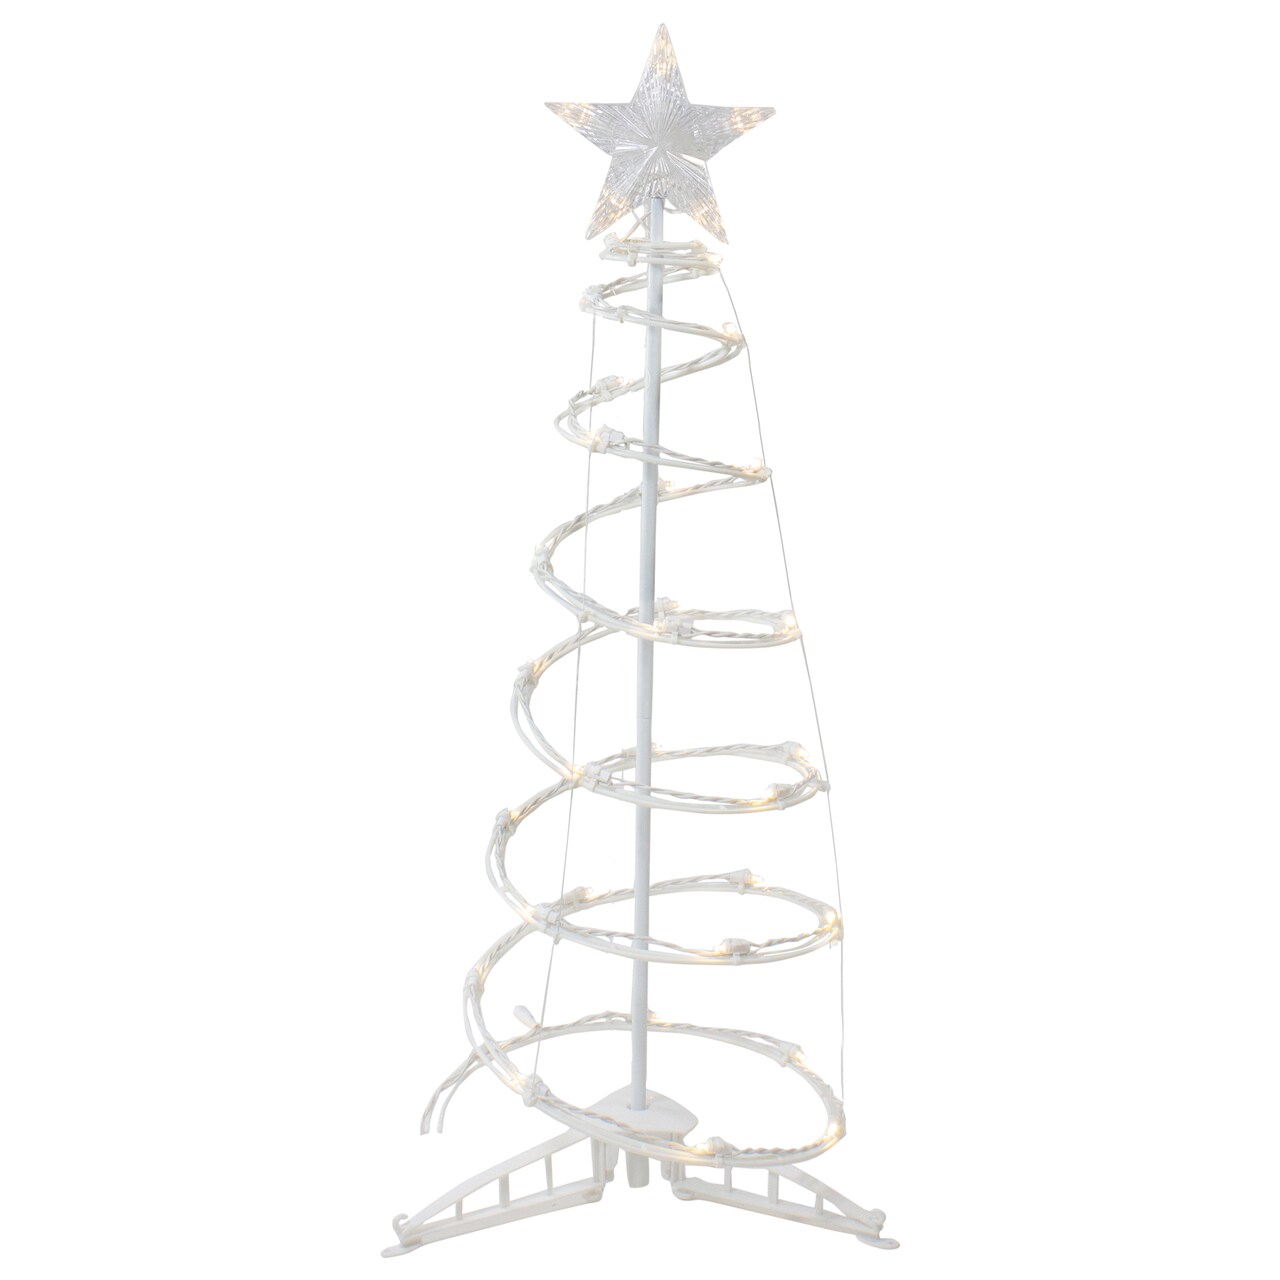 Northlight 3ft LED Lighted Spiral Cone Tree Outdoor Christmas Decoration, Warm White Lights